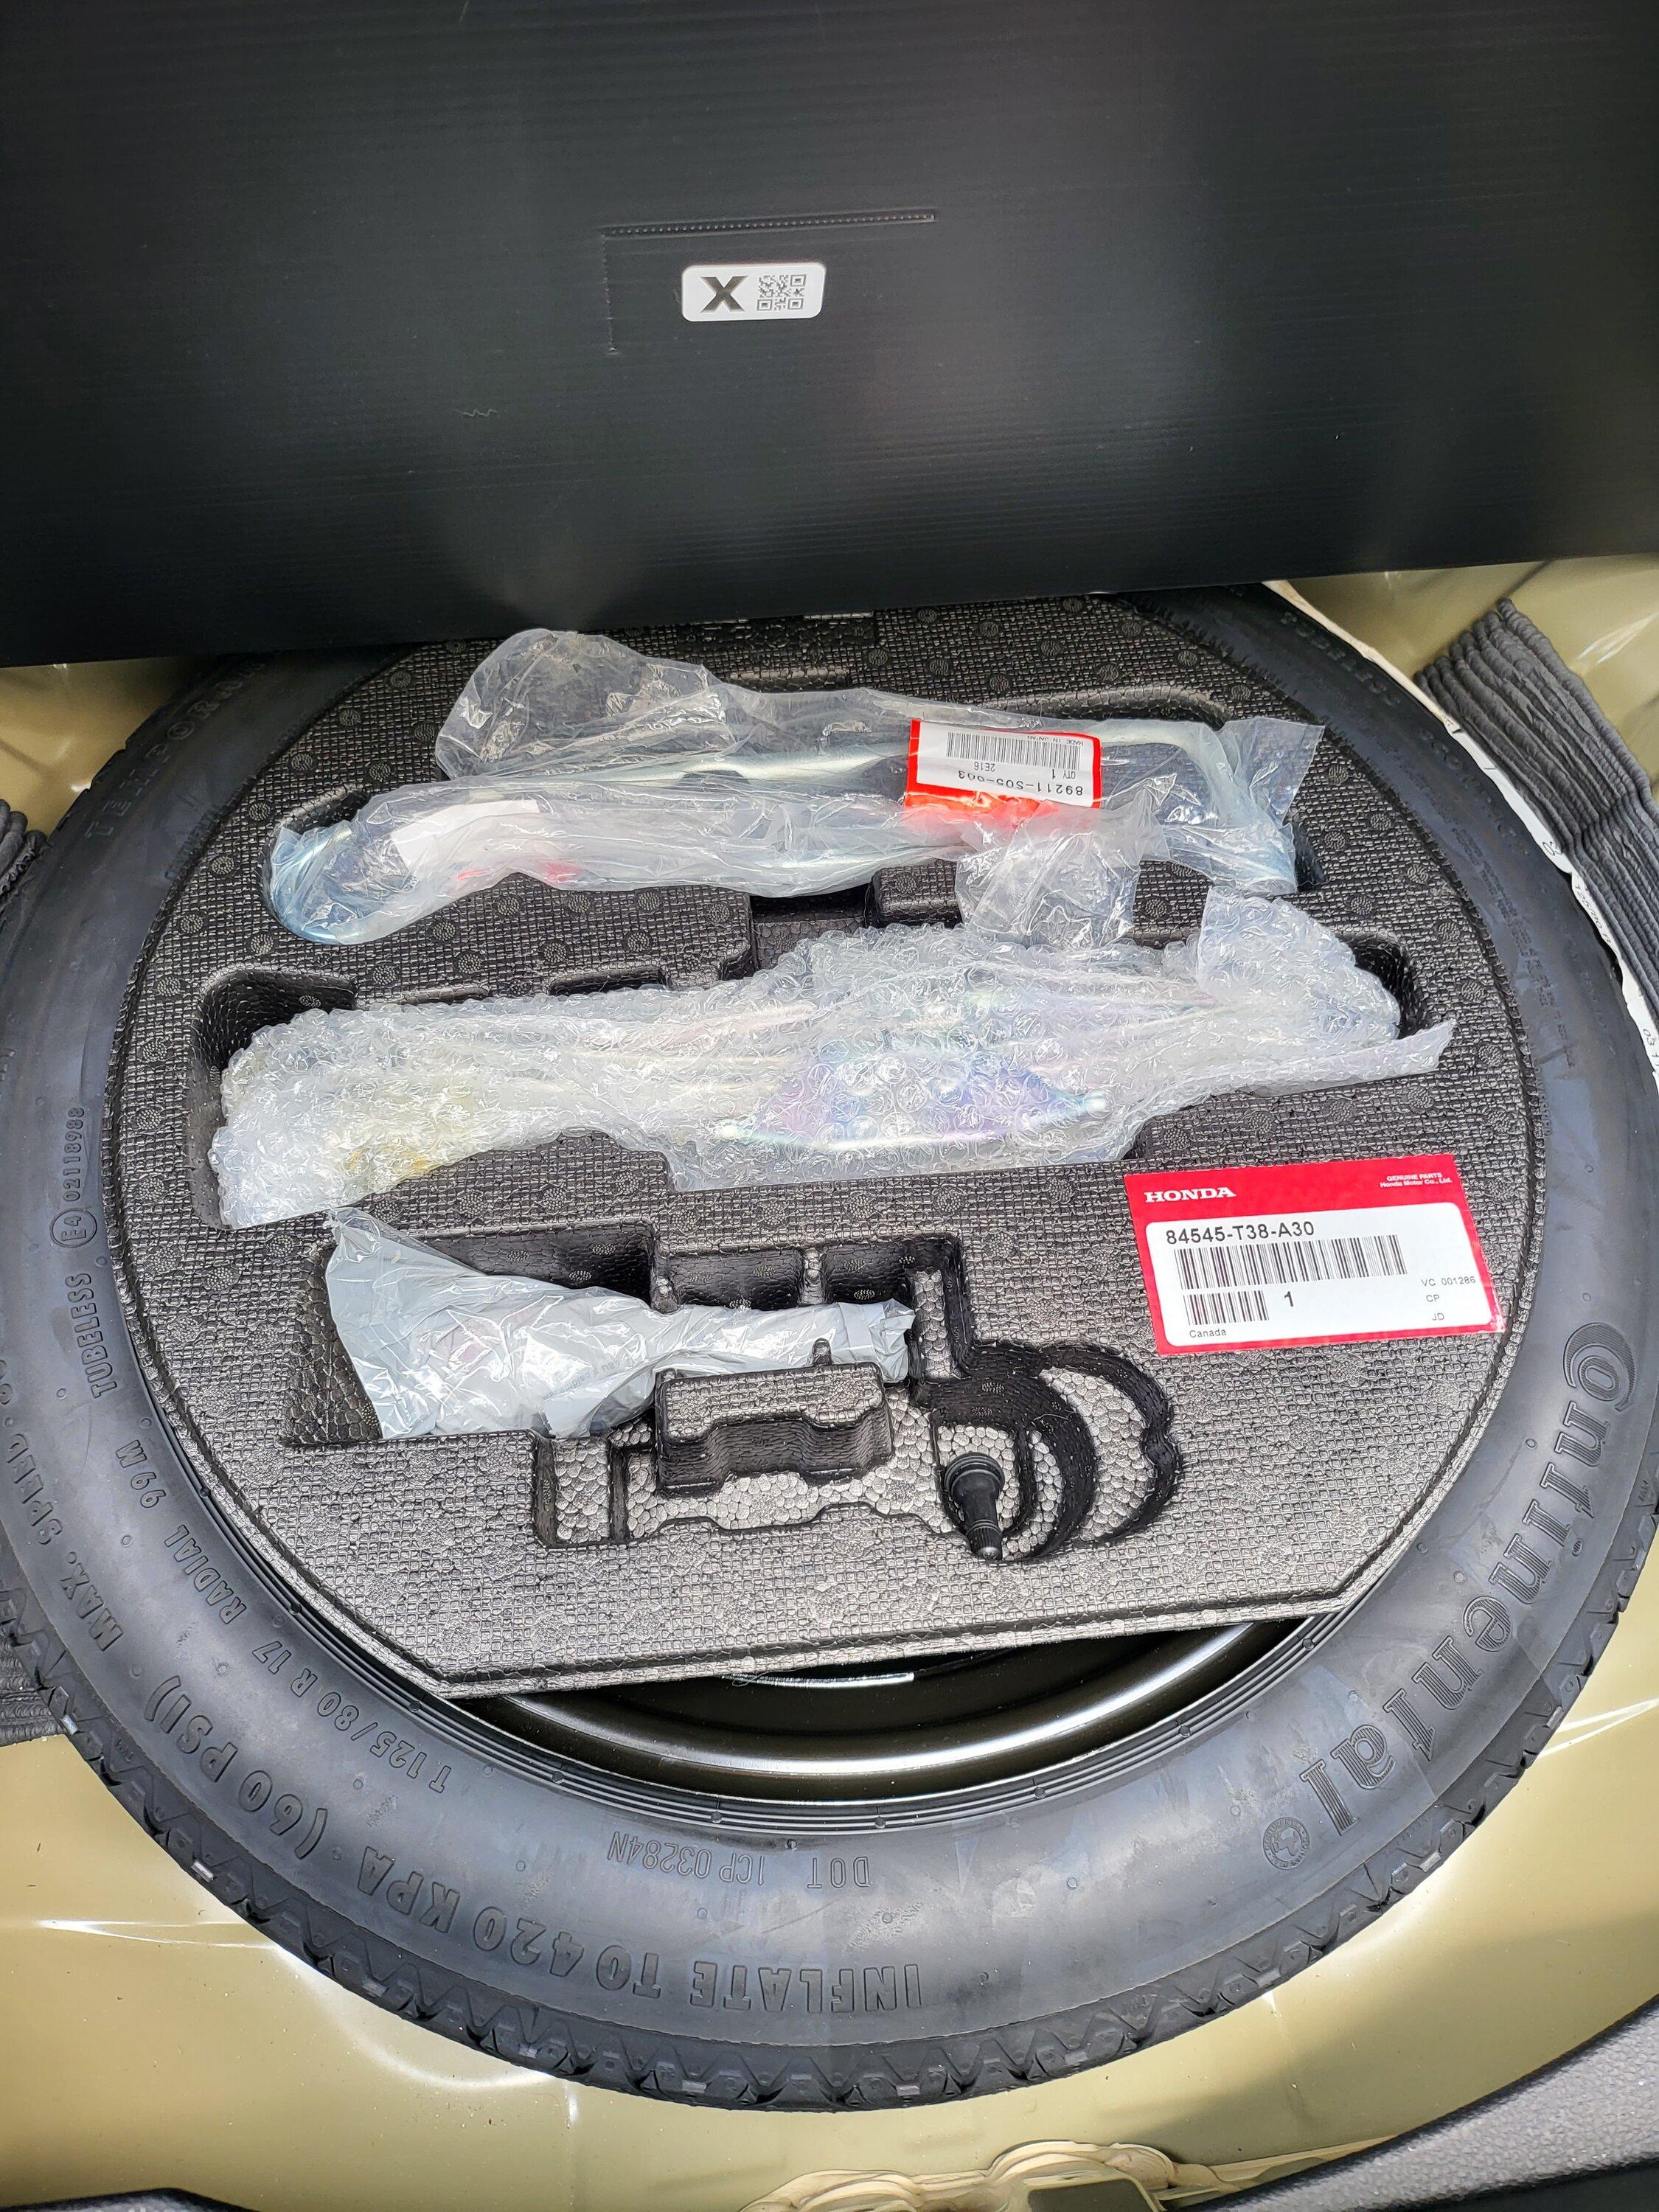 11th Gen Honda Civic Tools in trunk. What goes here? spare tire si